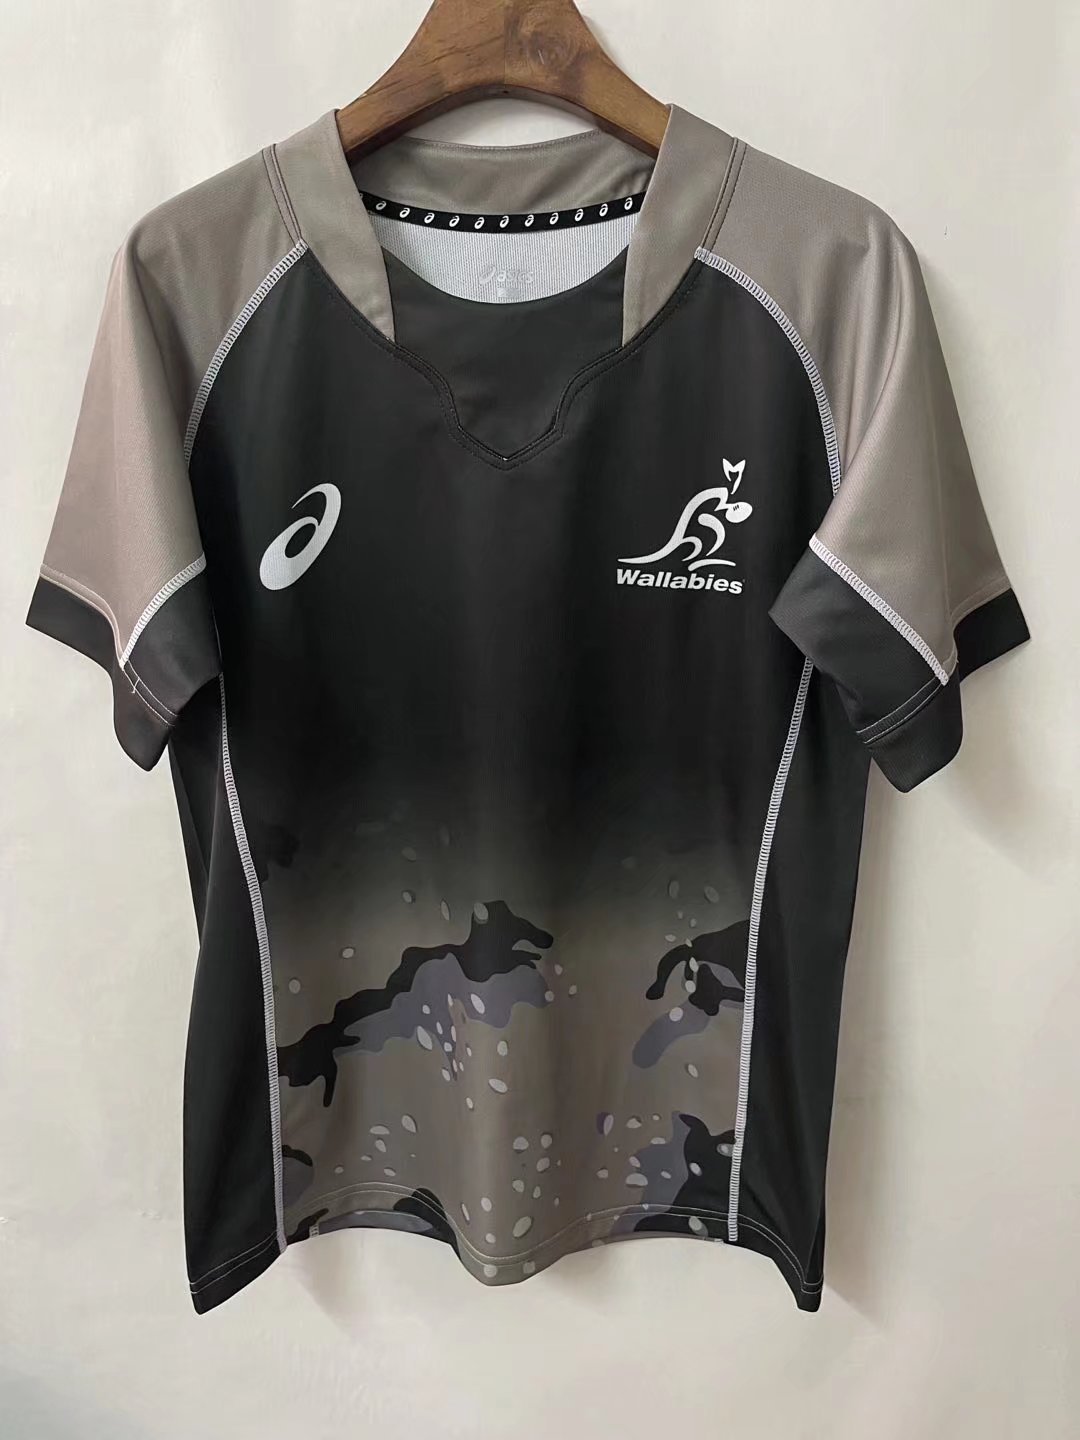 2021/22 AustraliaGray & Yellow Thailand Rugby Shirts-805